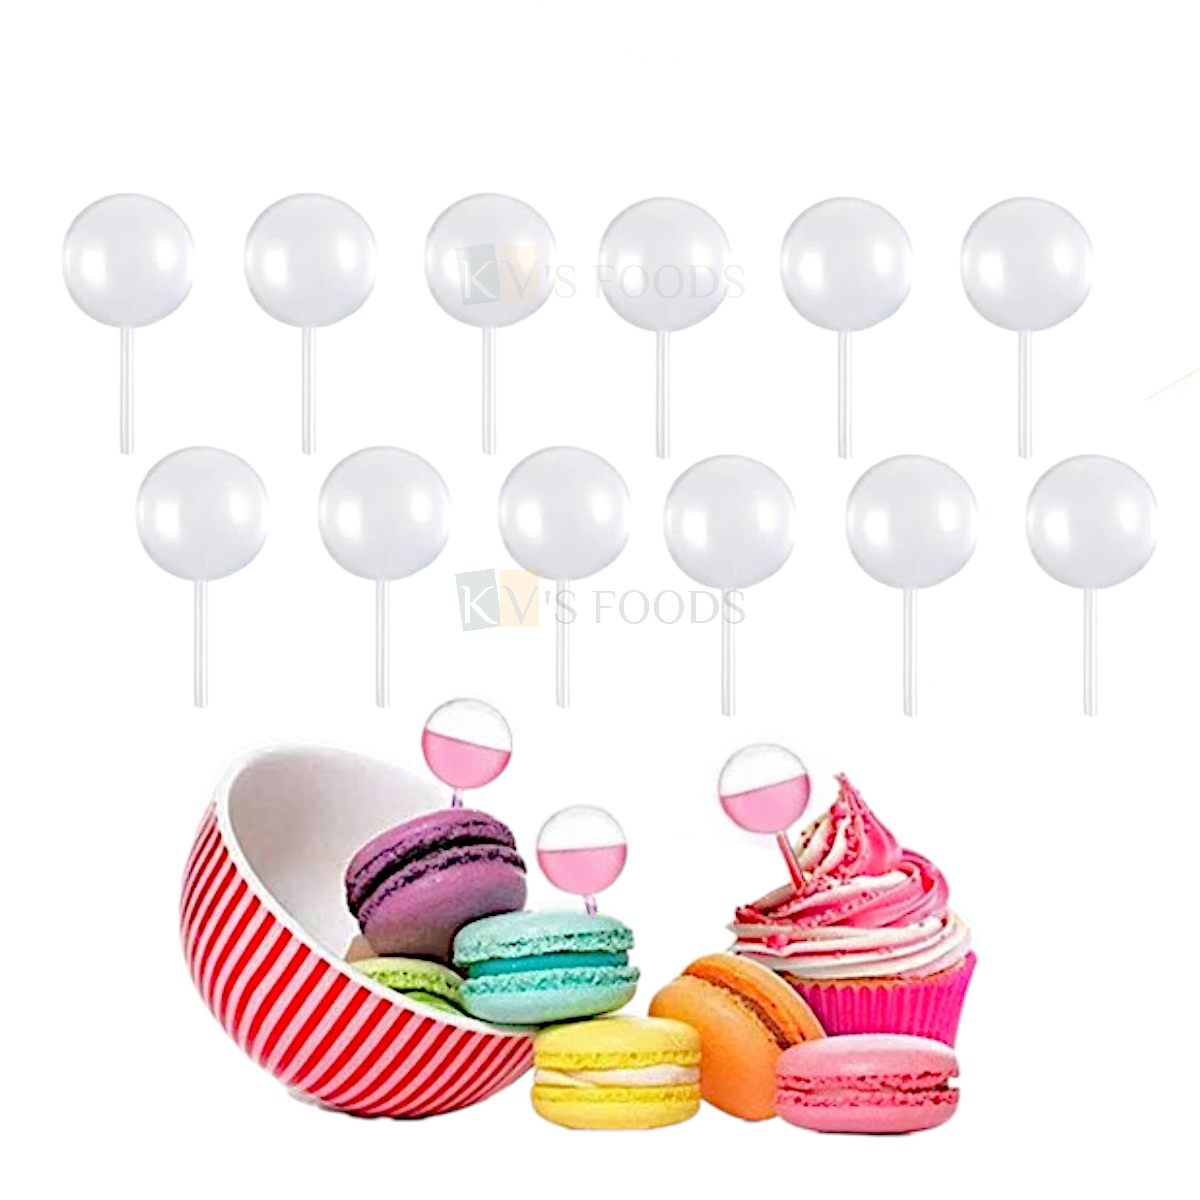 12 PCS Transparent Clear Round Mini Squeeze Pipettes Liquid Dropper Pasteur Pipette Juice Sauce Special Flavor Dropper for Birthday Cakes Chocolate Cupcakes and Strawberry Ice Cream Desserts Inserts